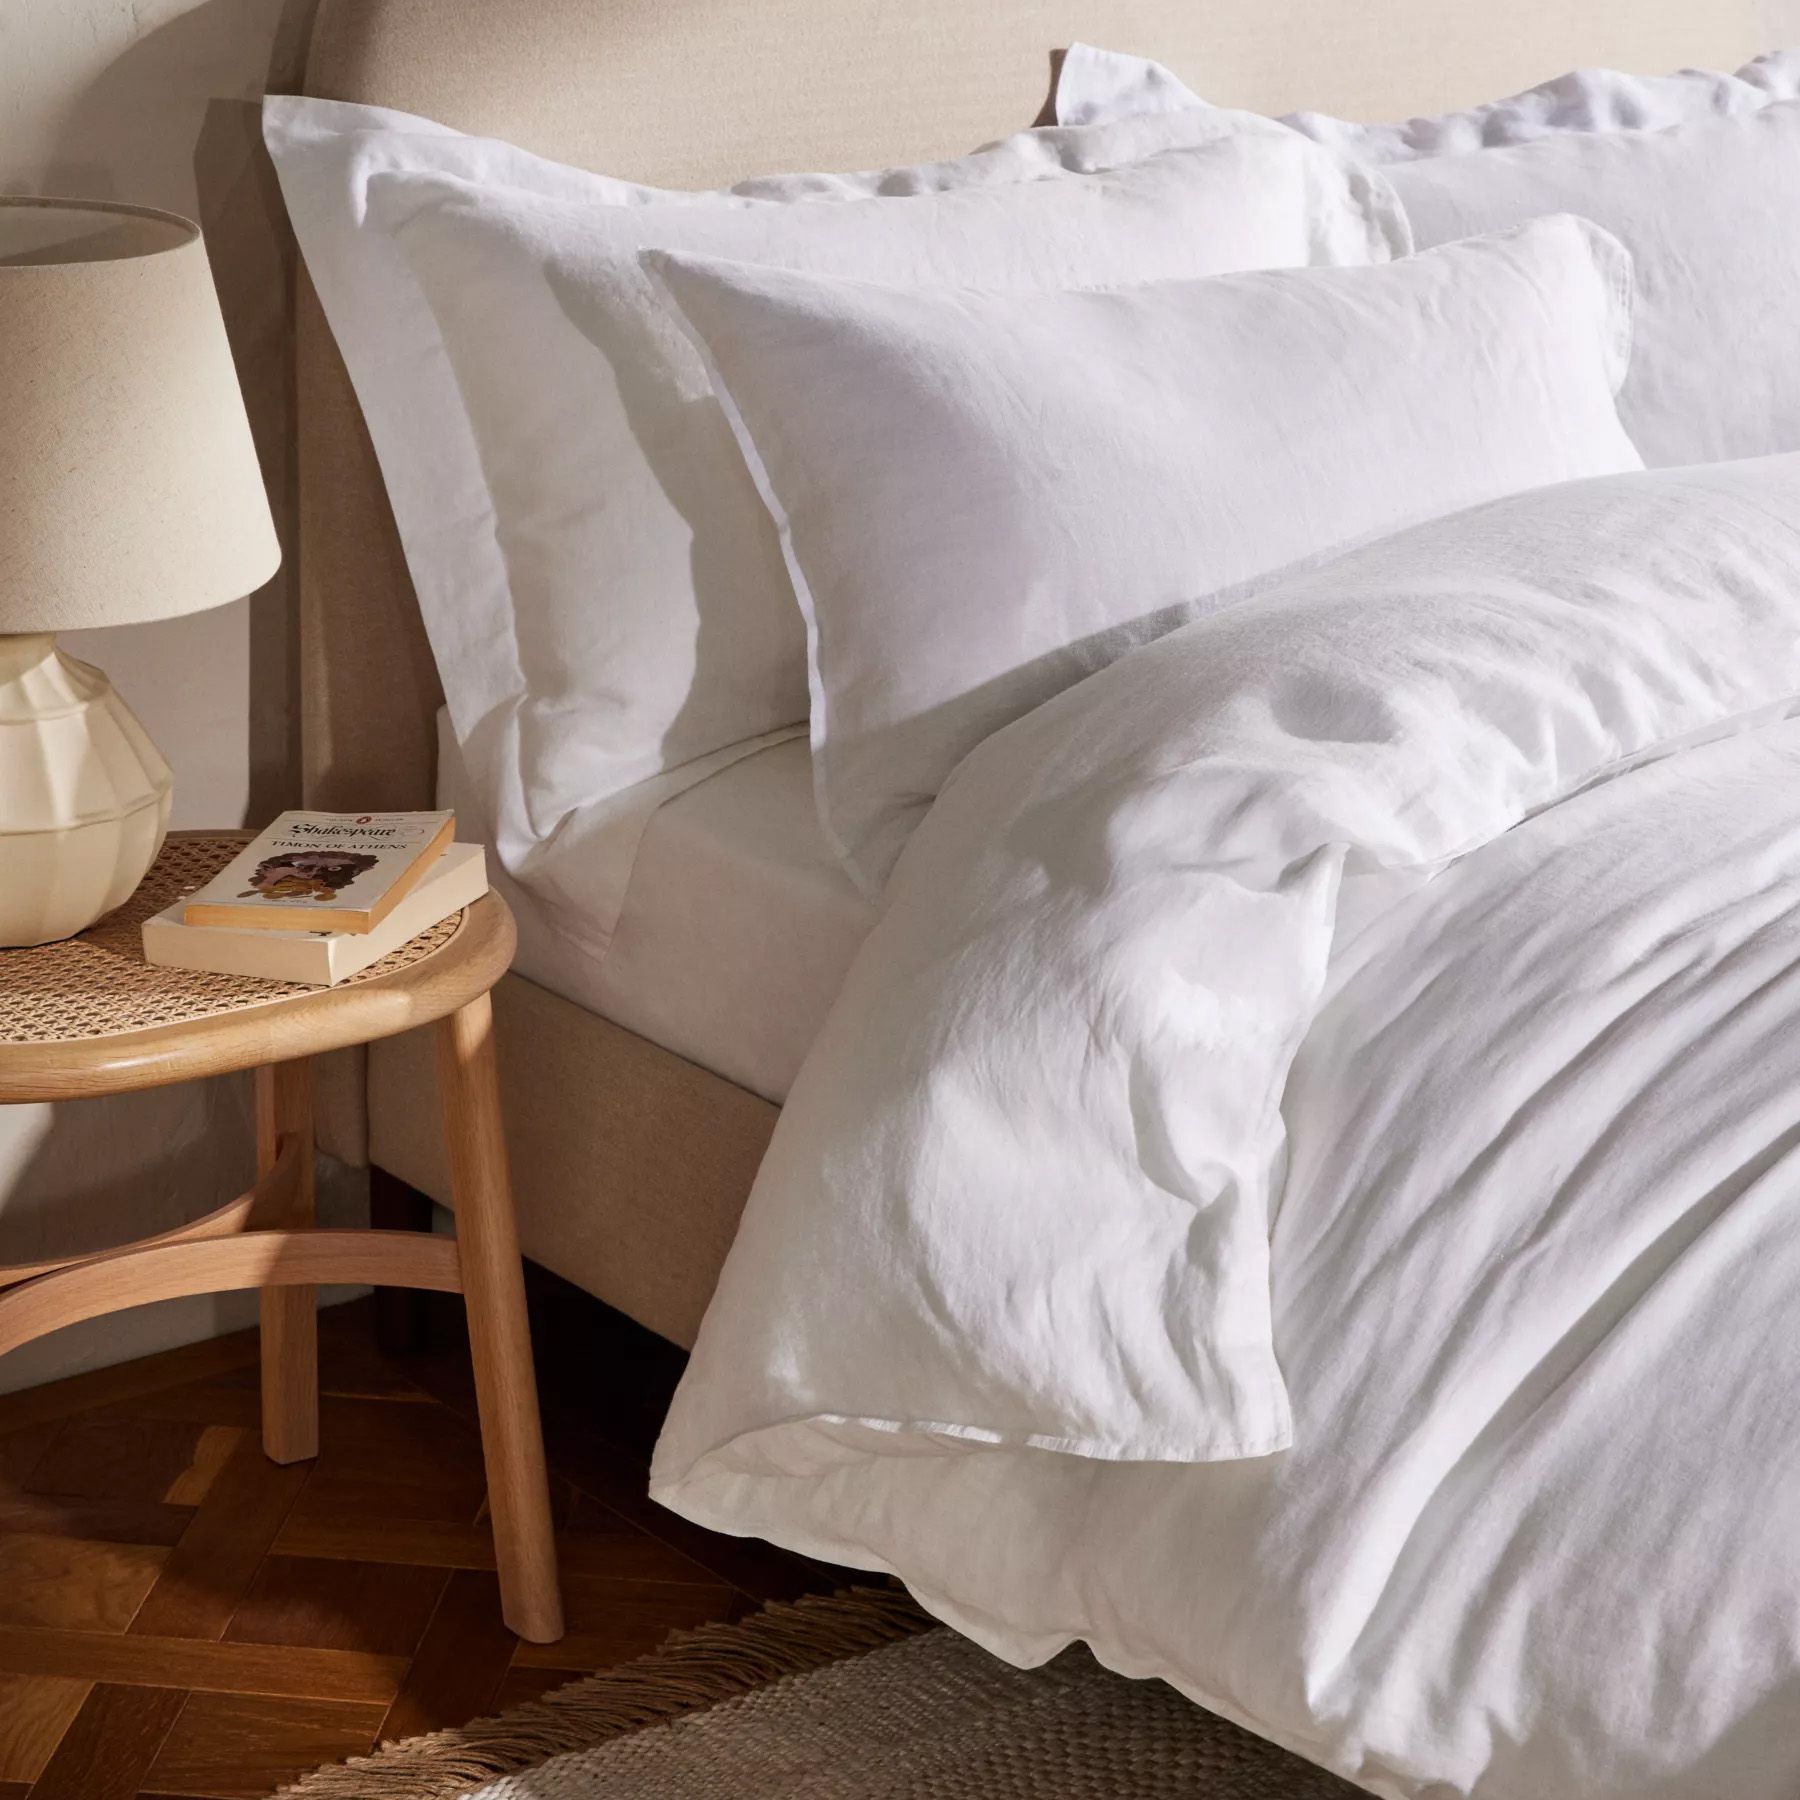 Bedding, Bed Sets and Bed Linen